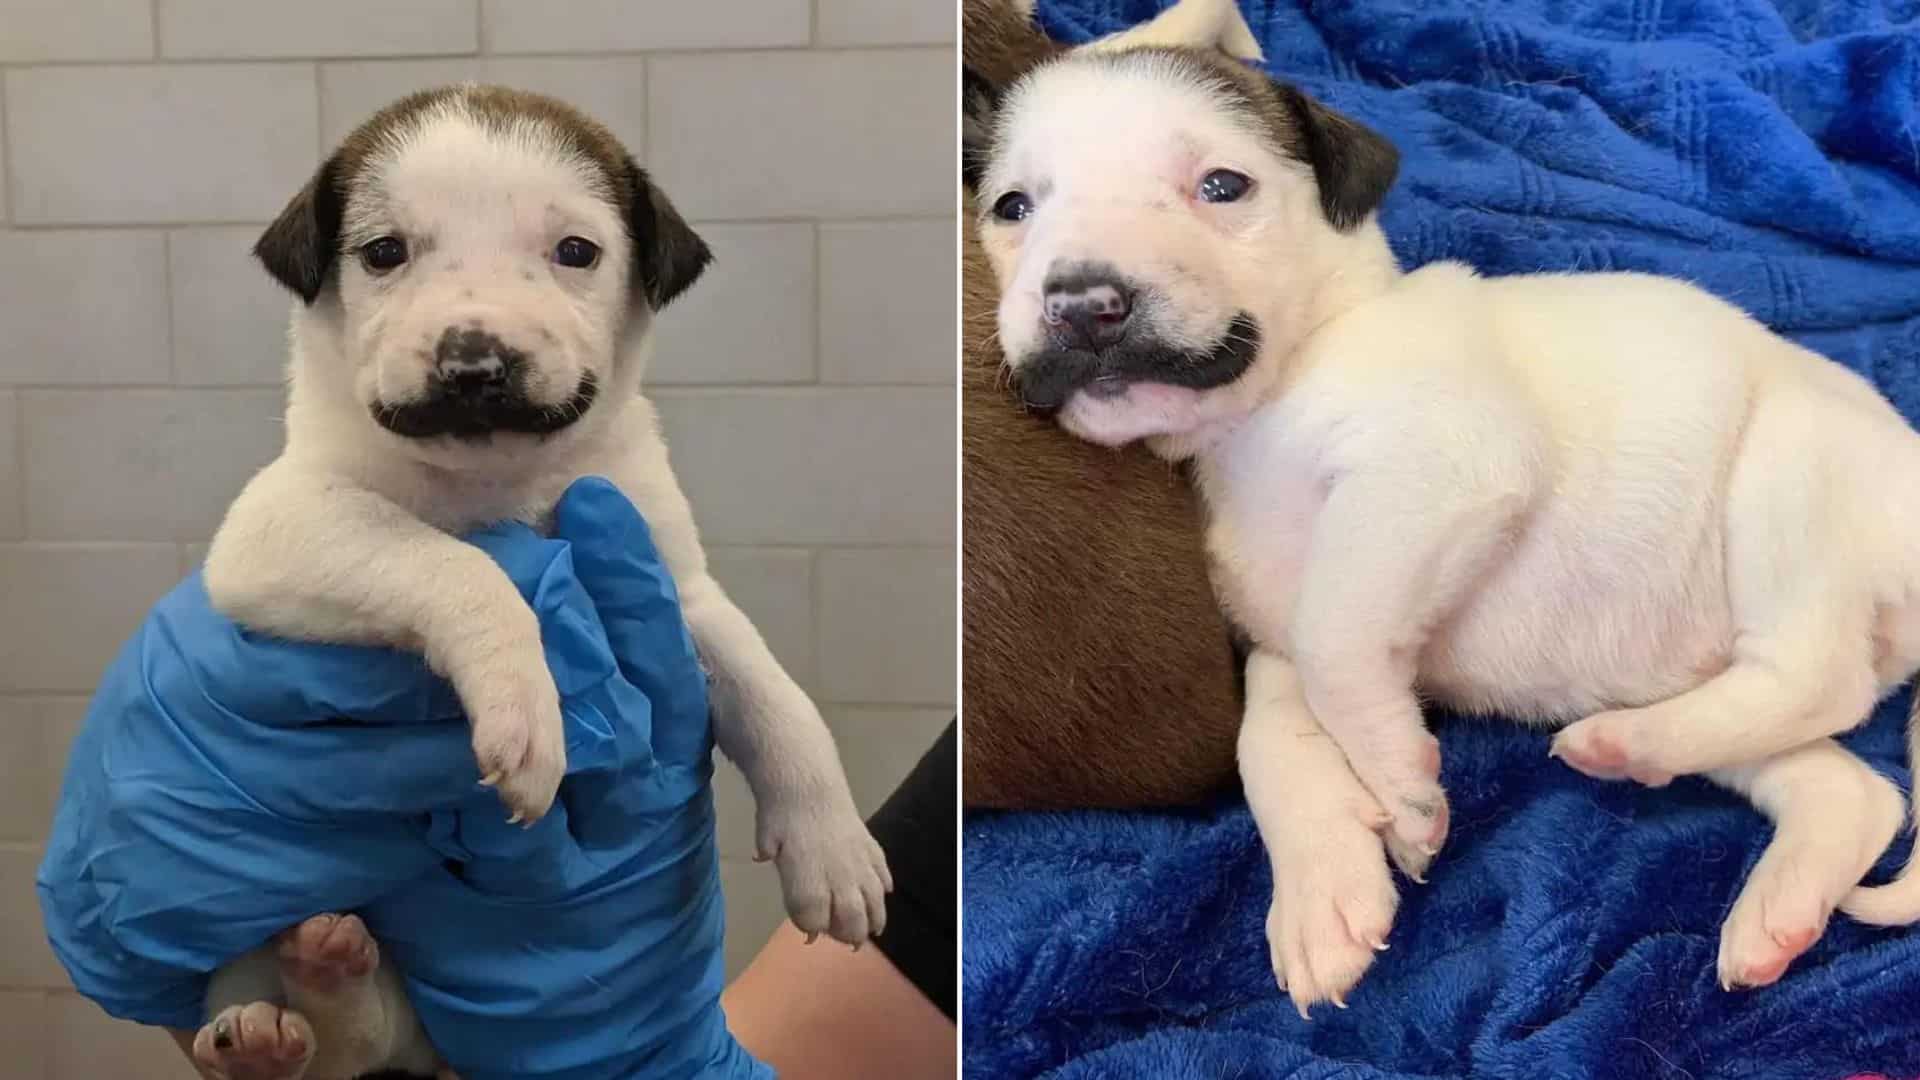 This Pup’s Resemblance With Salvador Dali Is Incredible